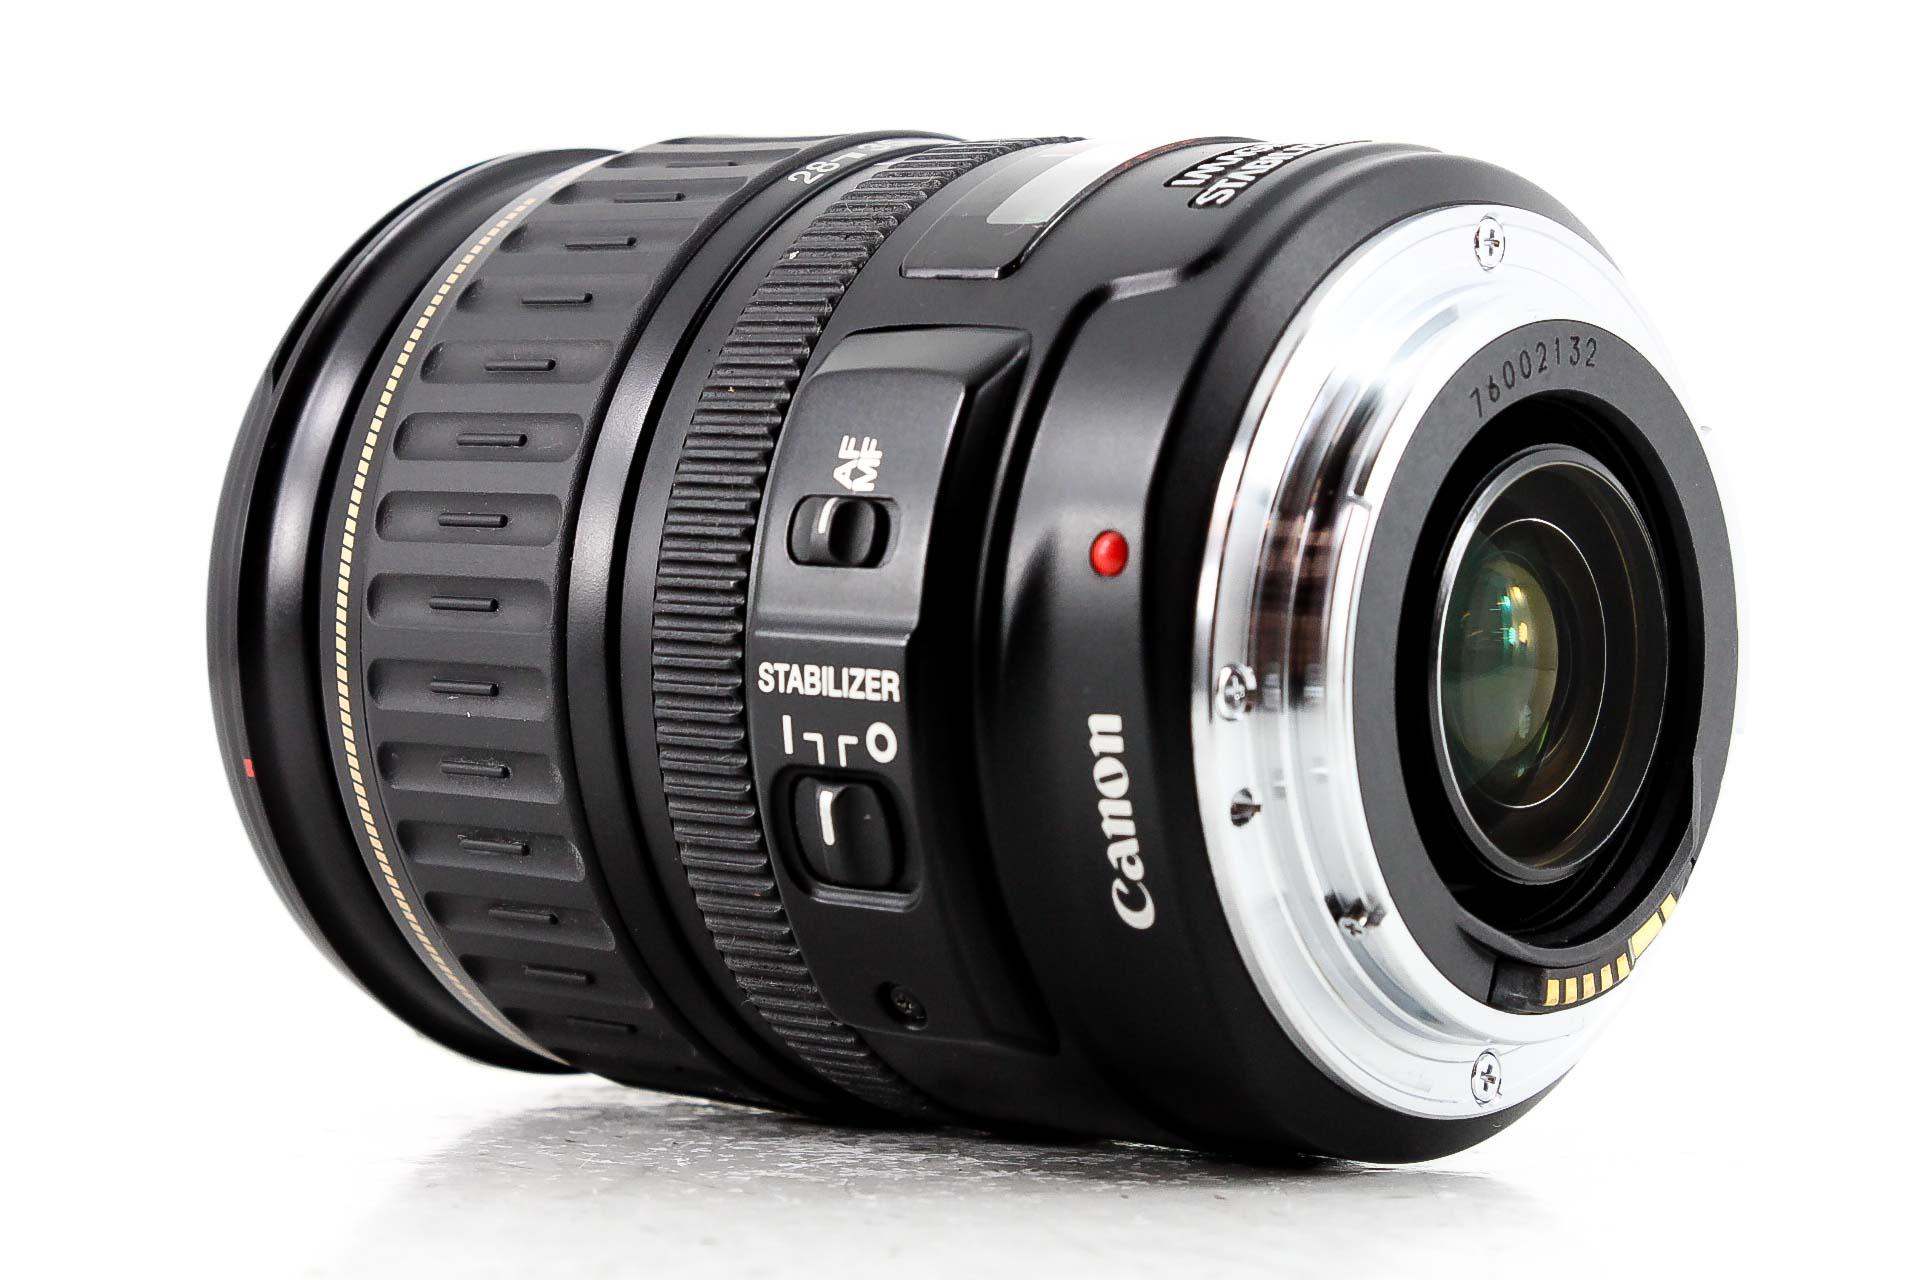 Canon EF 28-135mm f3.5-5.6 IS USM Lens - Lenses and Cameras